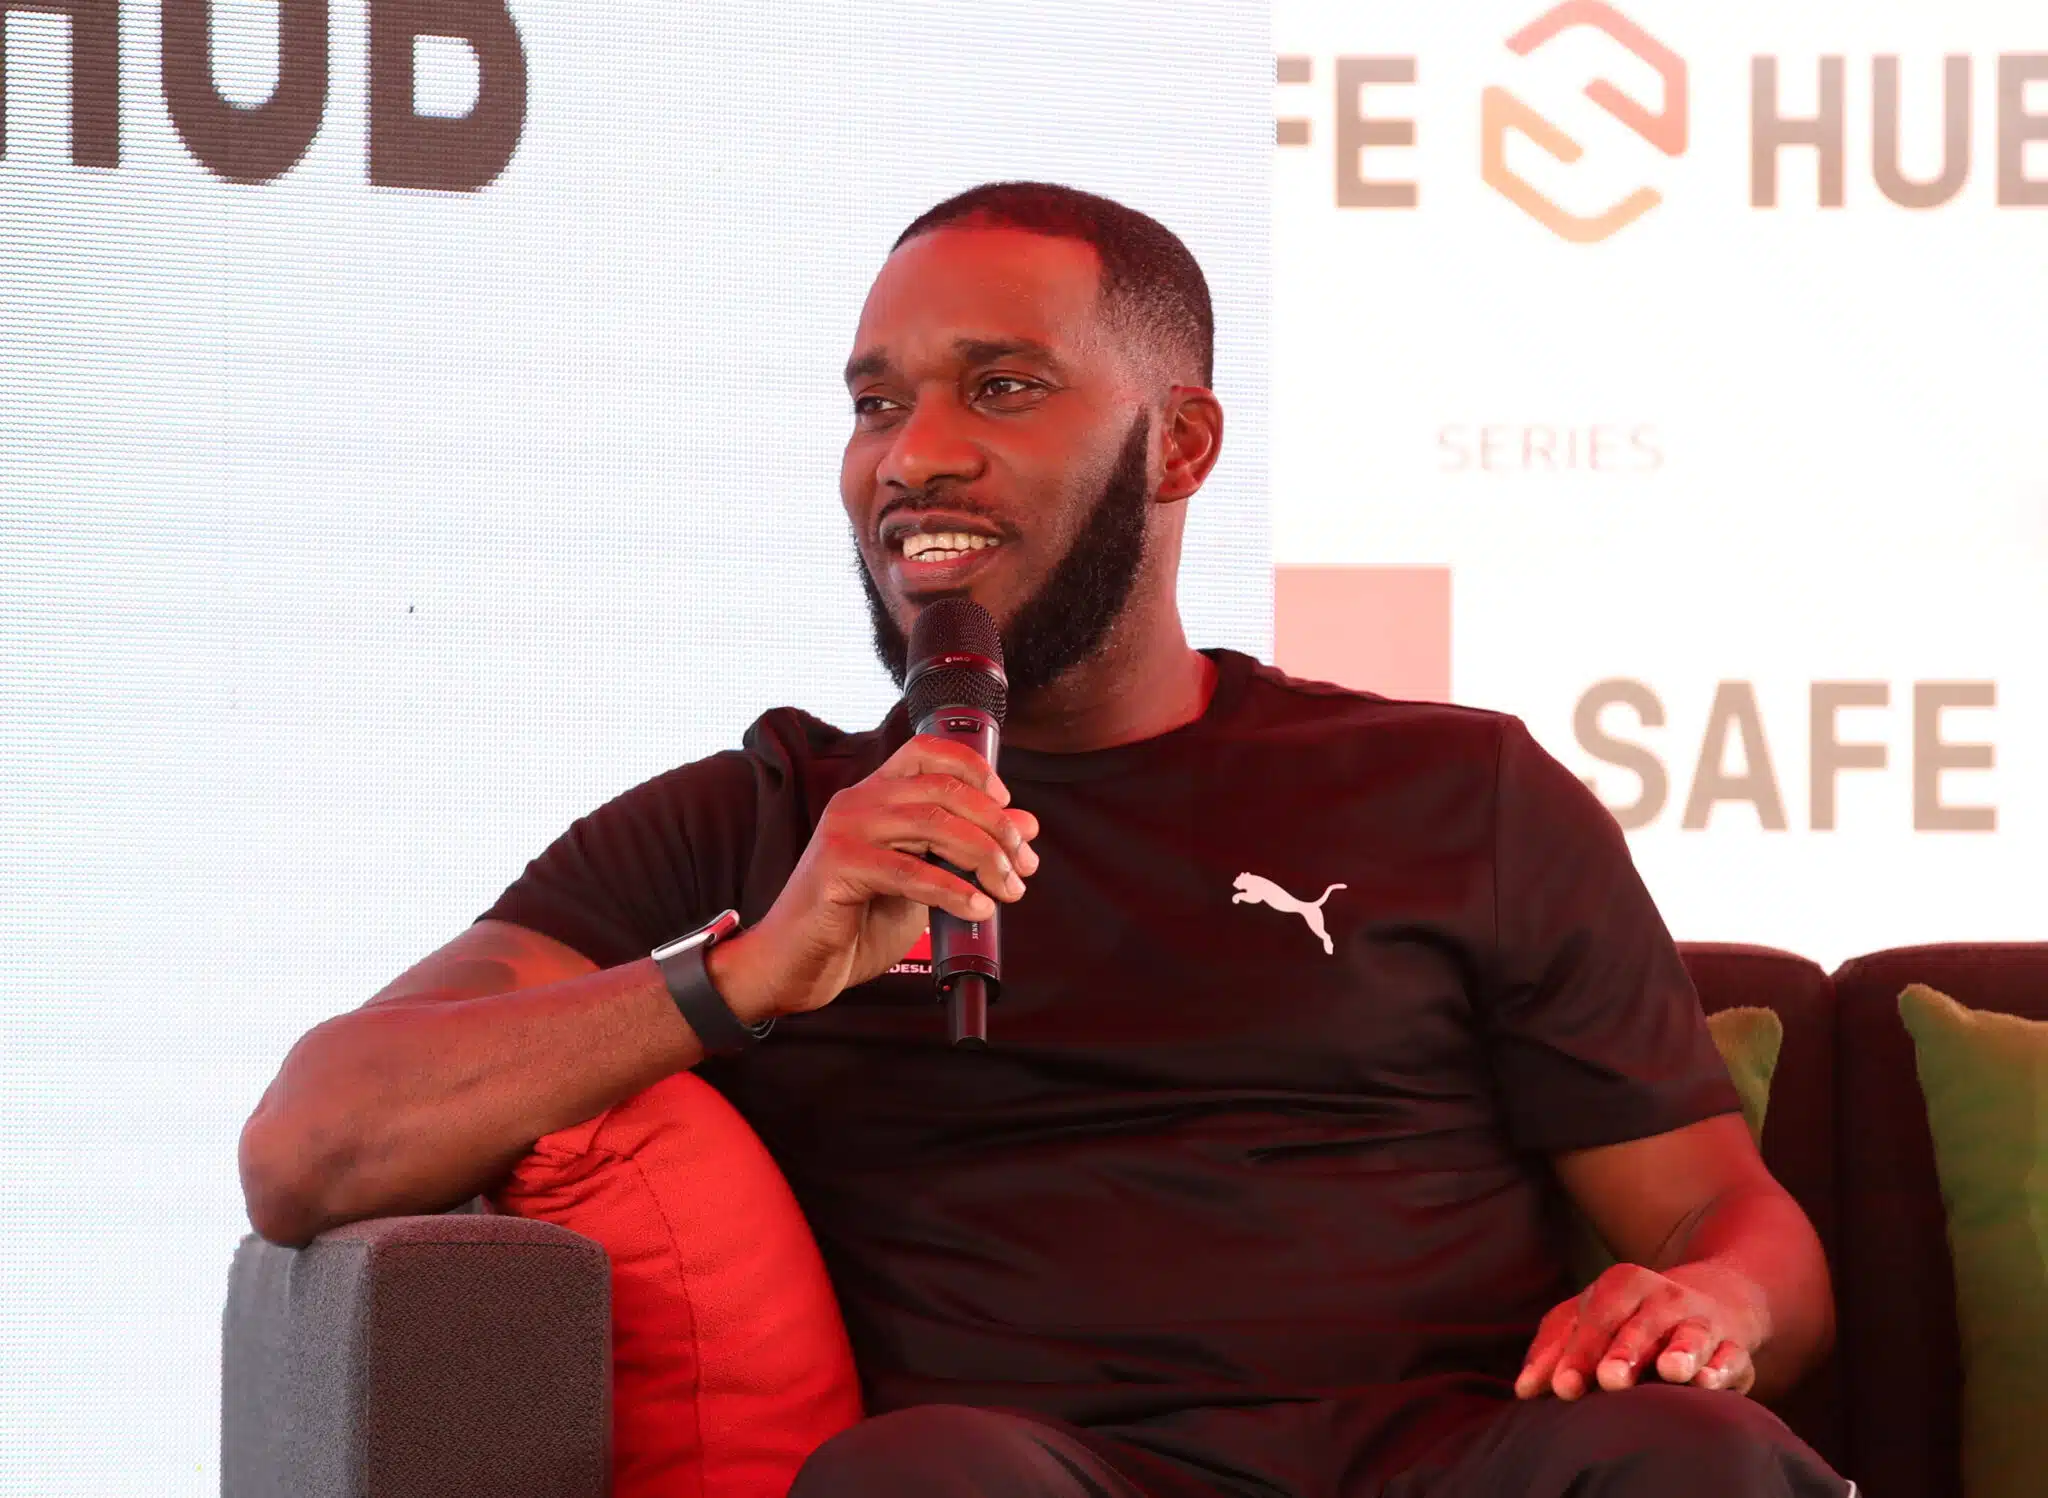 AFCON 2023 - "Nigeria is one of the favorites but we can't ignore other teams" - Austin Jay-Jay Okocha